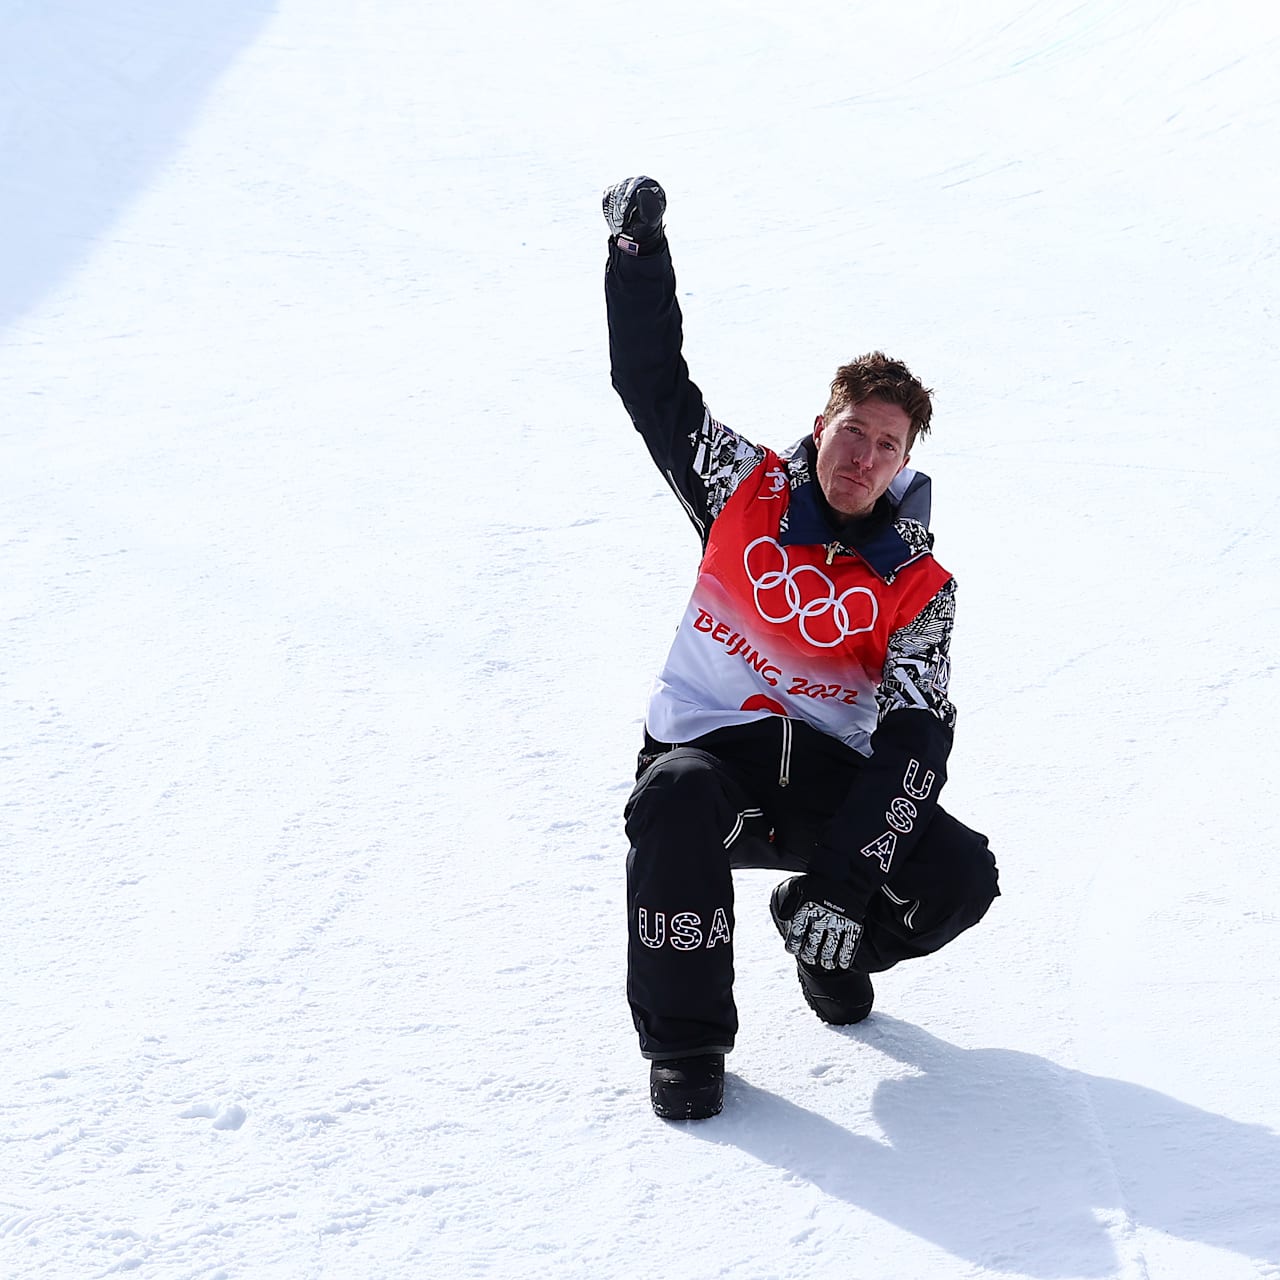 Sad and surreal': snowboard legend Shaun White to retire after Beijing 2022, Winter Olympics Beijing 2022